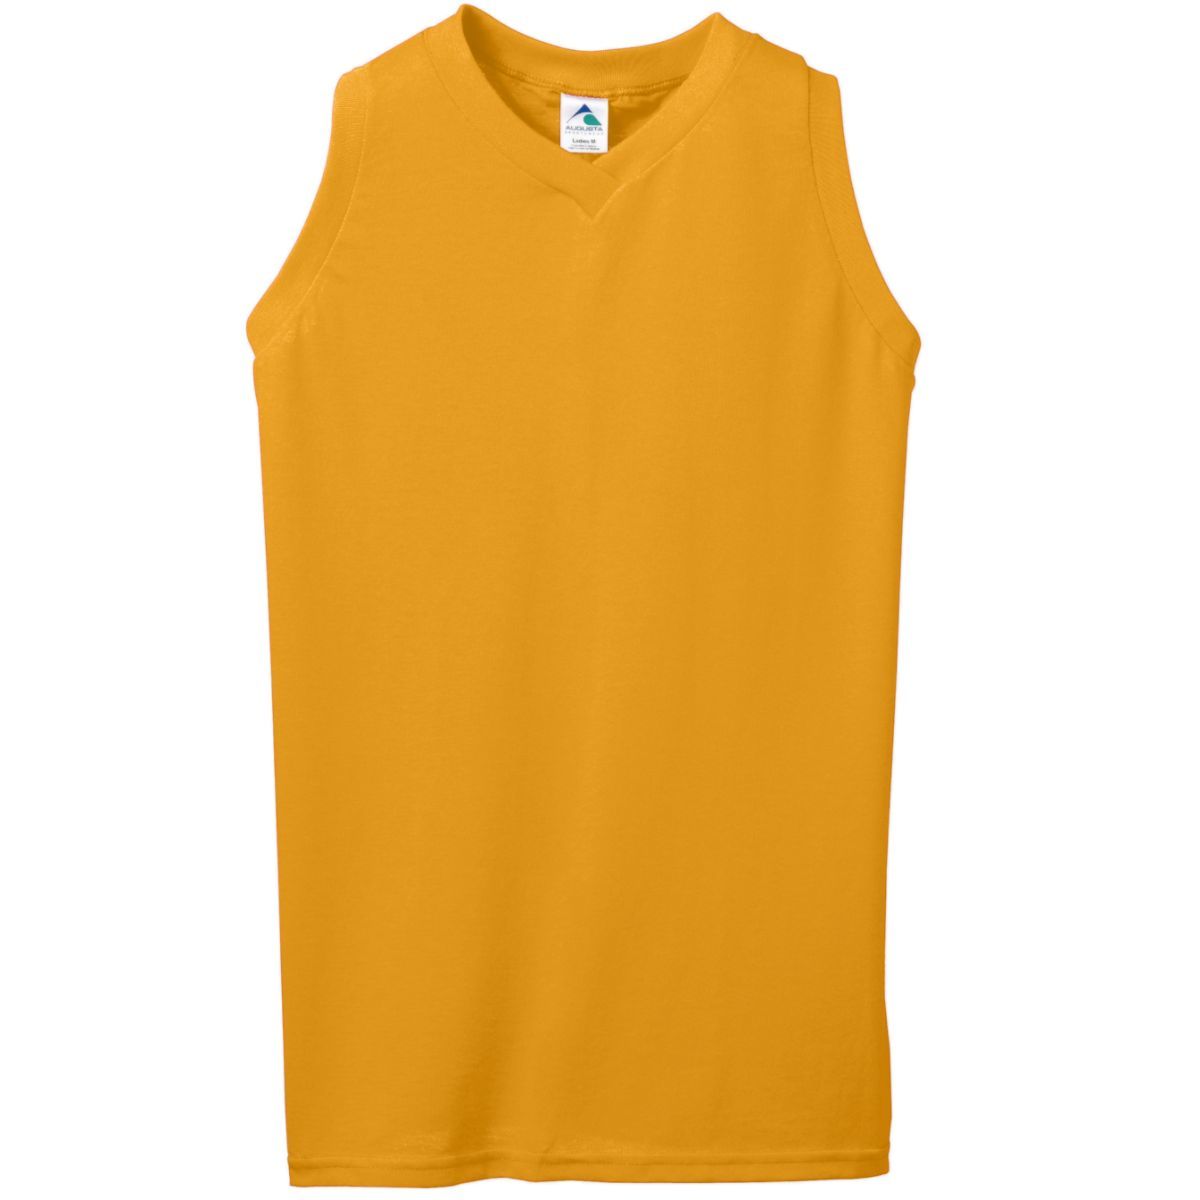 Augusta Sportswear Ladies Sleeveless V-Neck Poly/Cotton Jersey in Gold  -Part of the Ladies, Ladies-Jersey, Augusta-Products, Tennis, Shirts product lines at KanaleyCreations.com